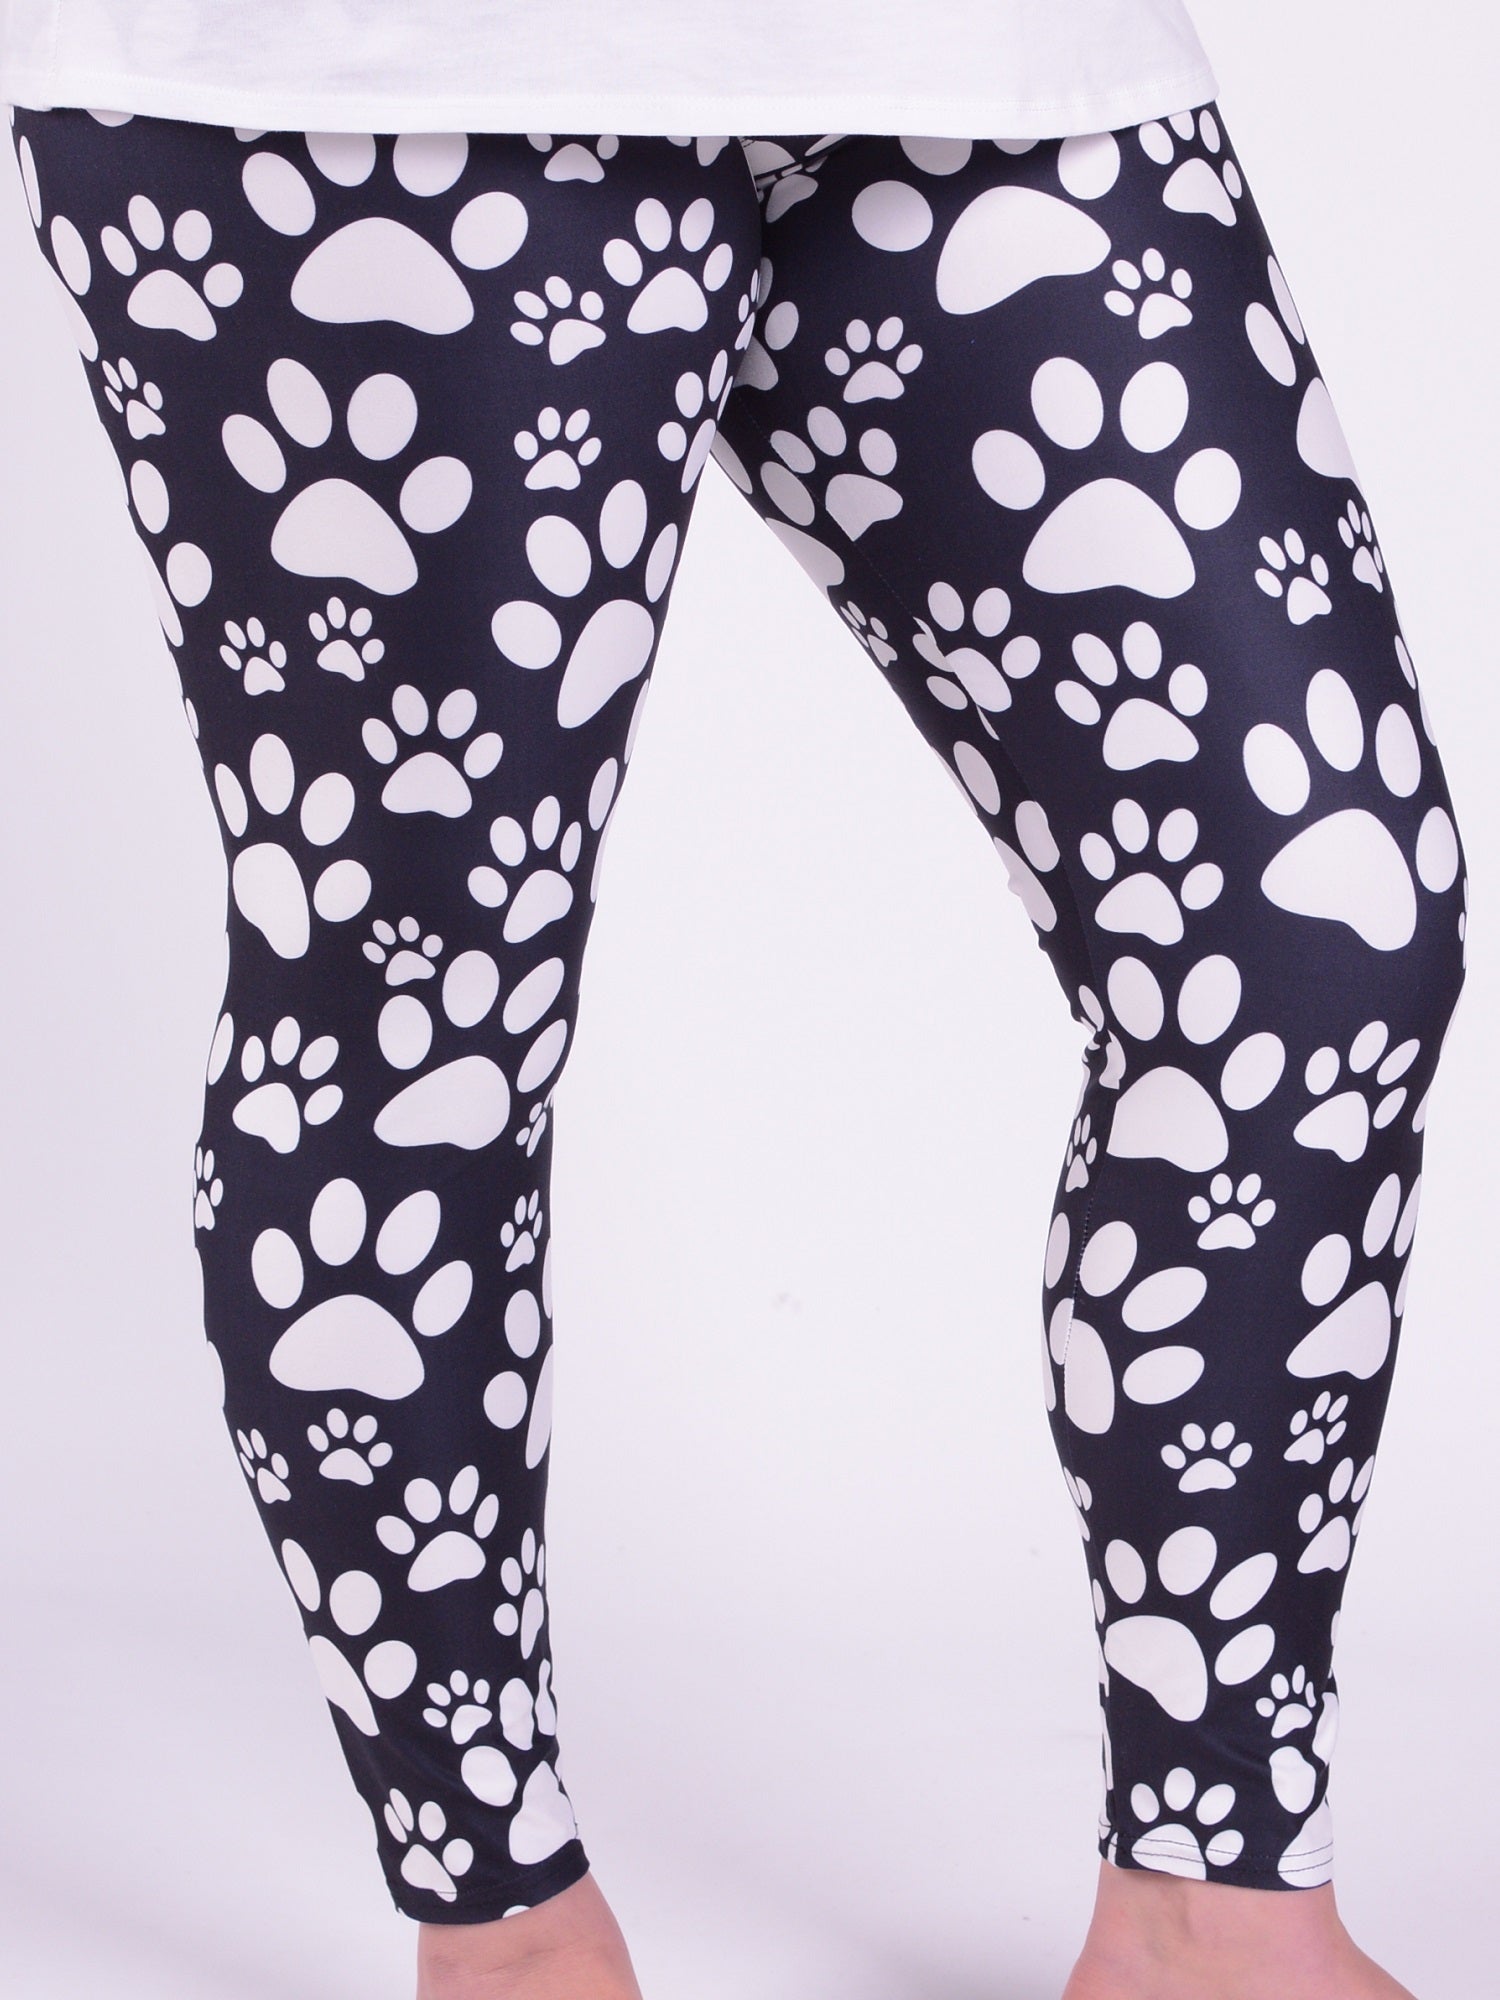 Leggings  - Black and White Paws - L57, Trousers, Pure Plus Clothing, Lagenlook Clothing, Plus Size Fashion, Over 50 Fashion